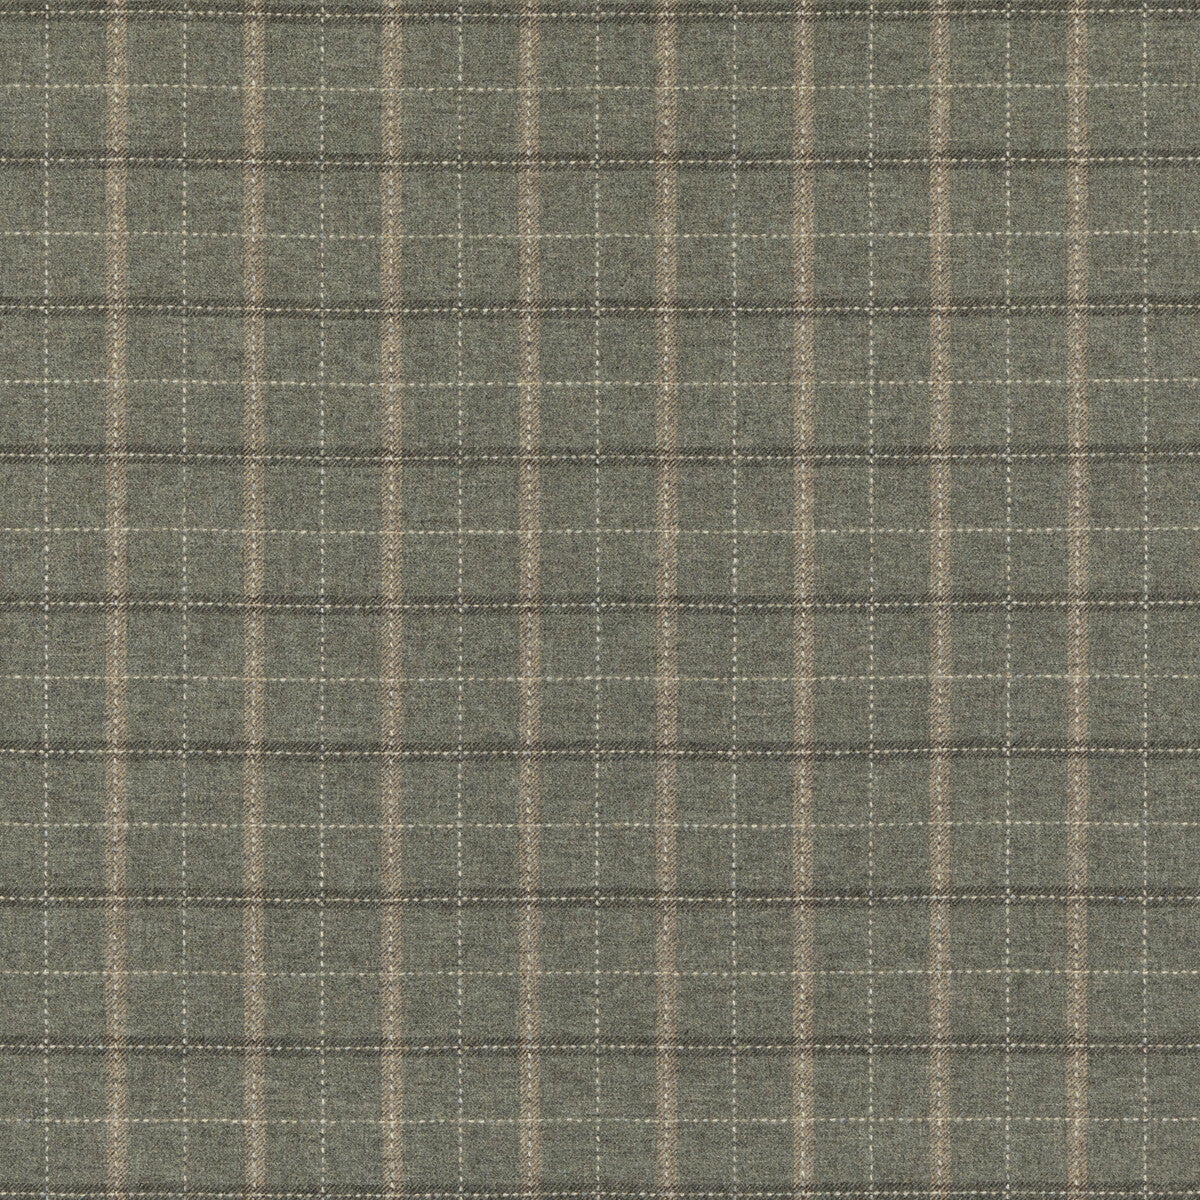 Bowmont fabric in dove color - pattern FD806.A22.0 - by Mulberry in the Mulberry Wools IV collection